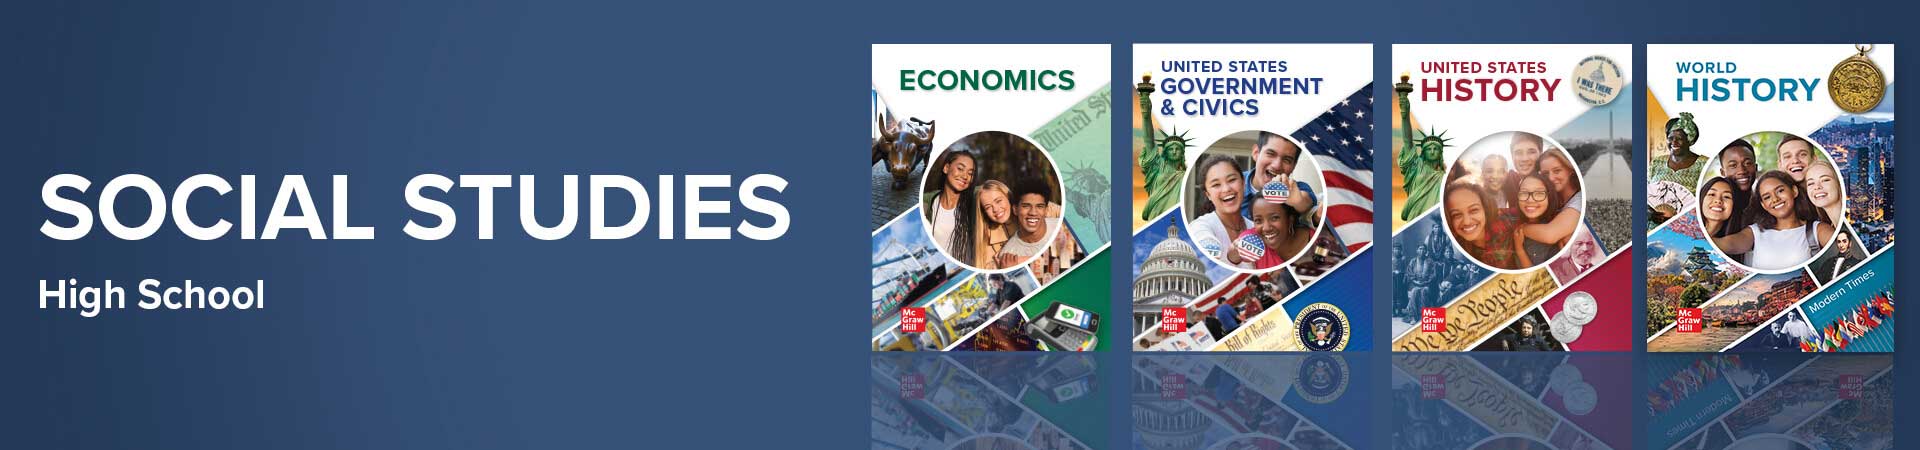 High School Social Studies logo and covers